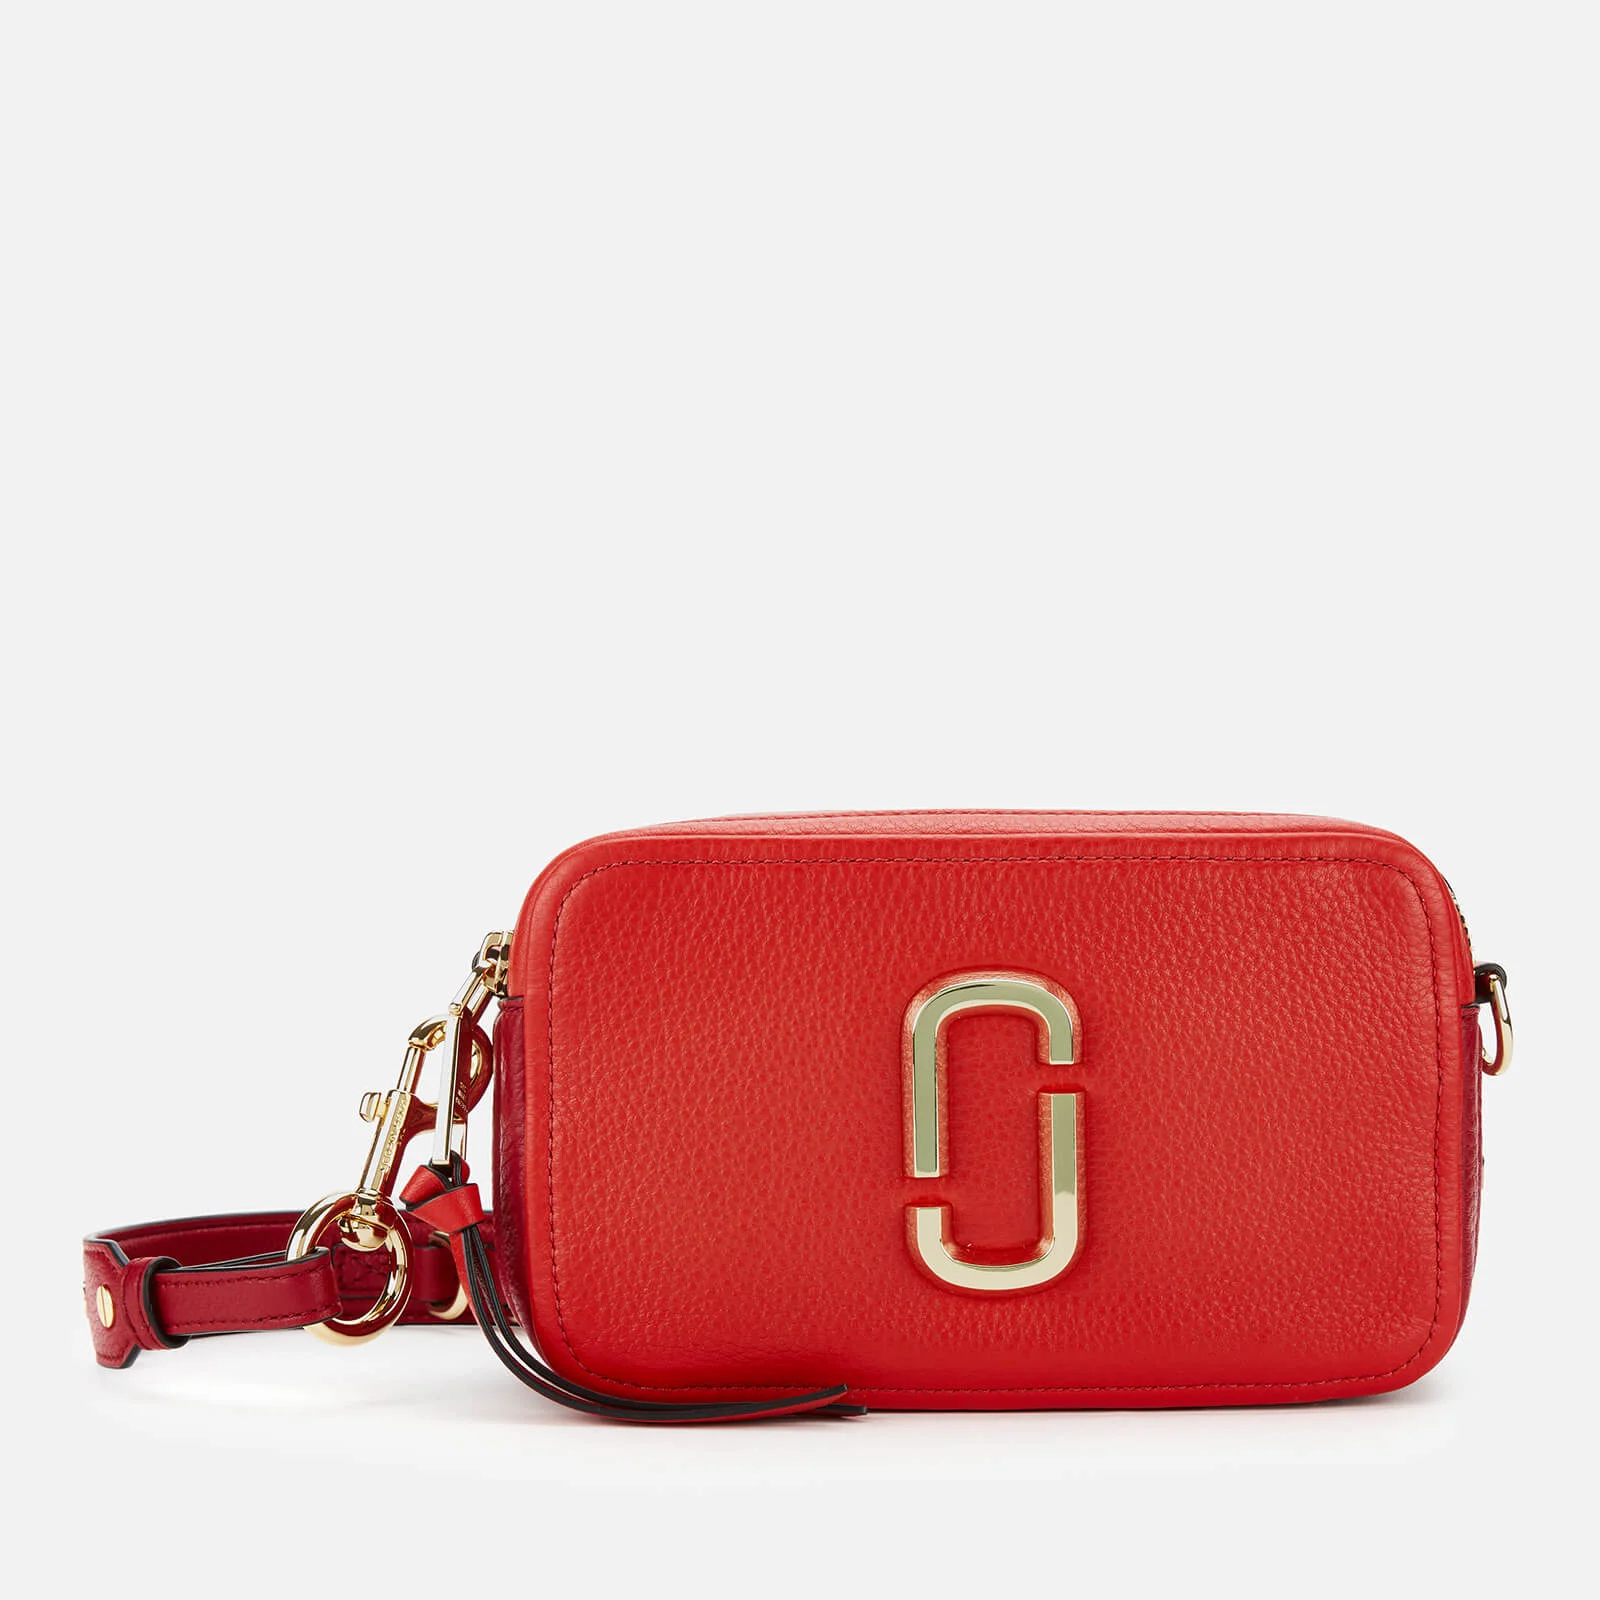 Marc Jacobs Women's The Softshot 21 - Bright Red Multi Image 1